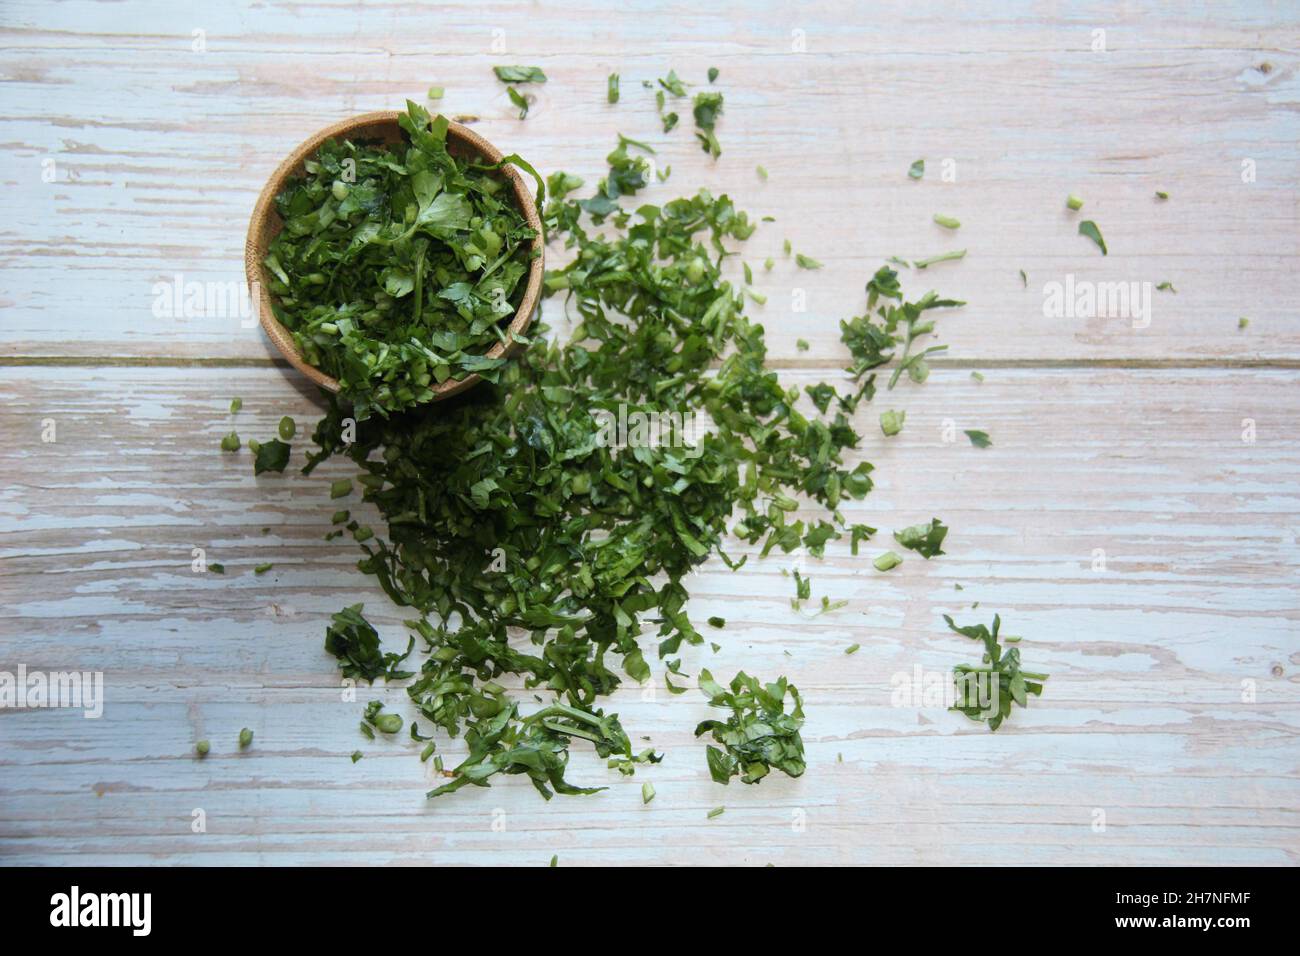 Parsley: fresh, chopped in a wooden bowl on an old wooden table. View from above. Stock Photo